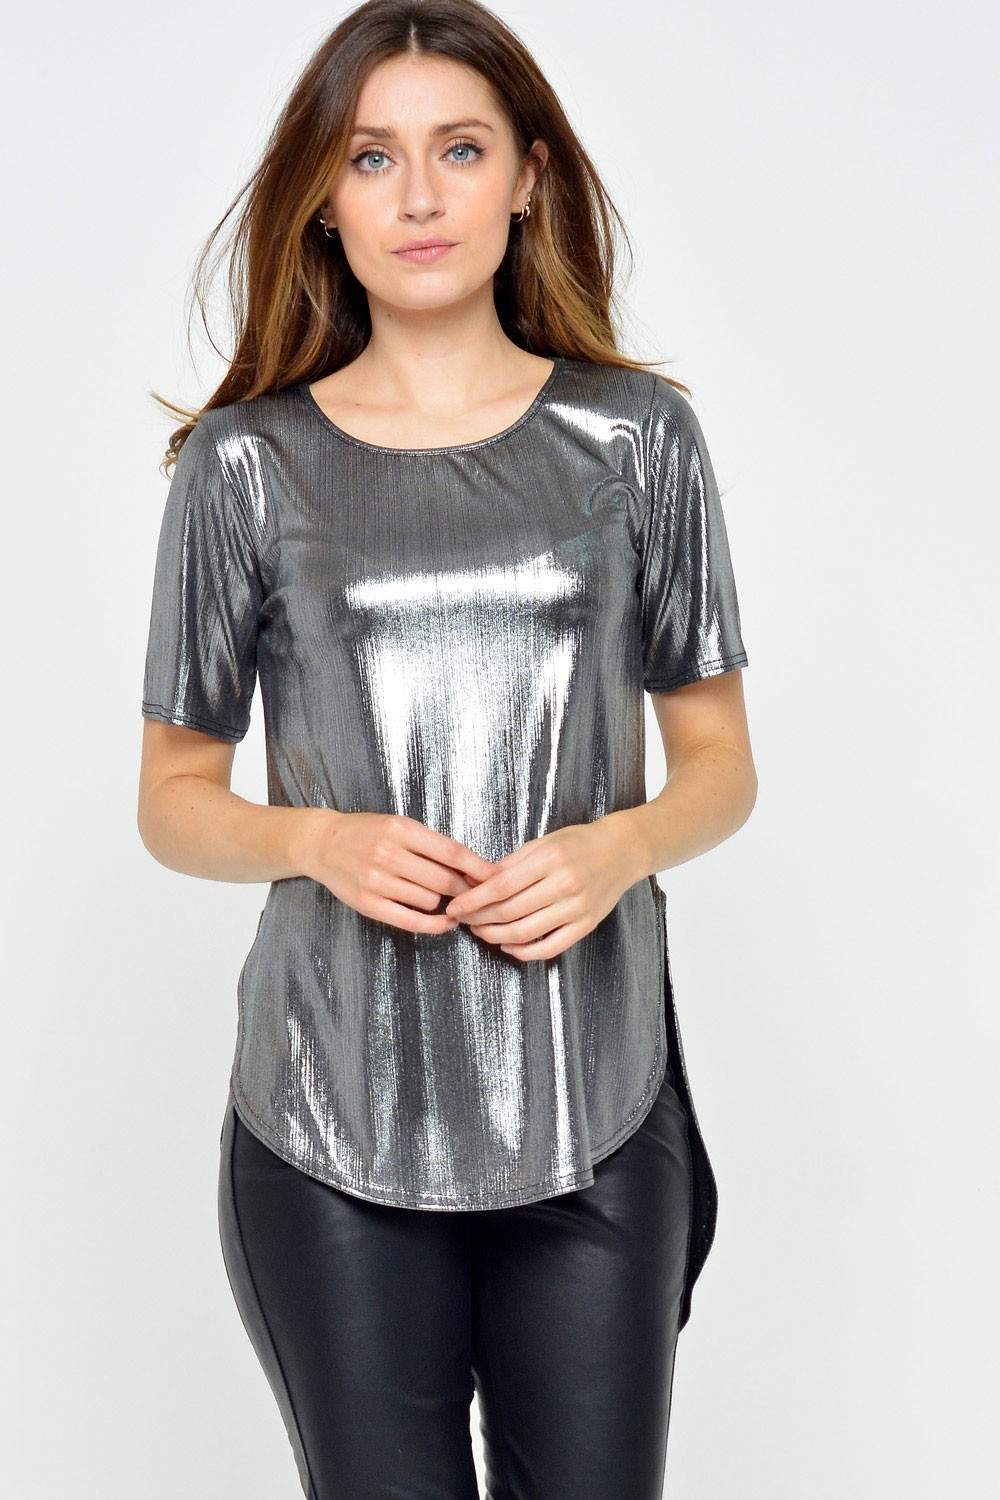 Passion Cami Metallic Top in Silver | iCLOTHING